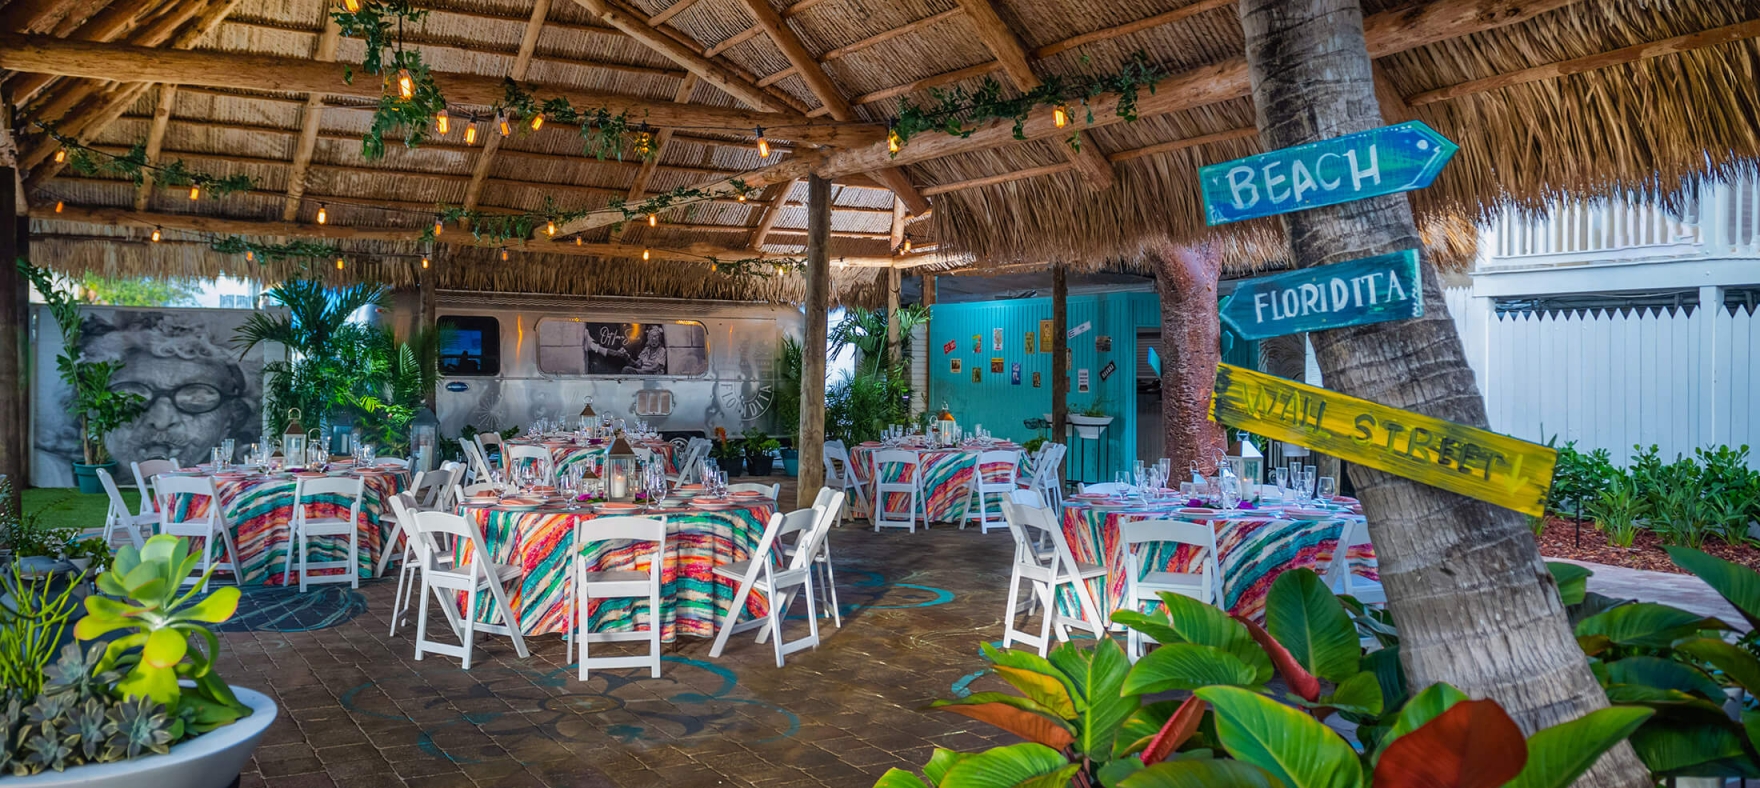 The dining area decor and layout in the Tiki Hut during an event